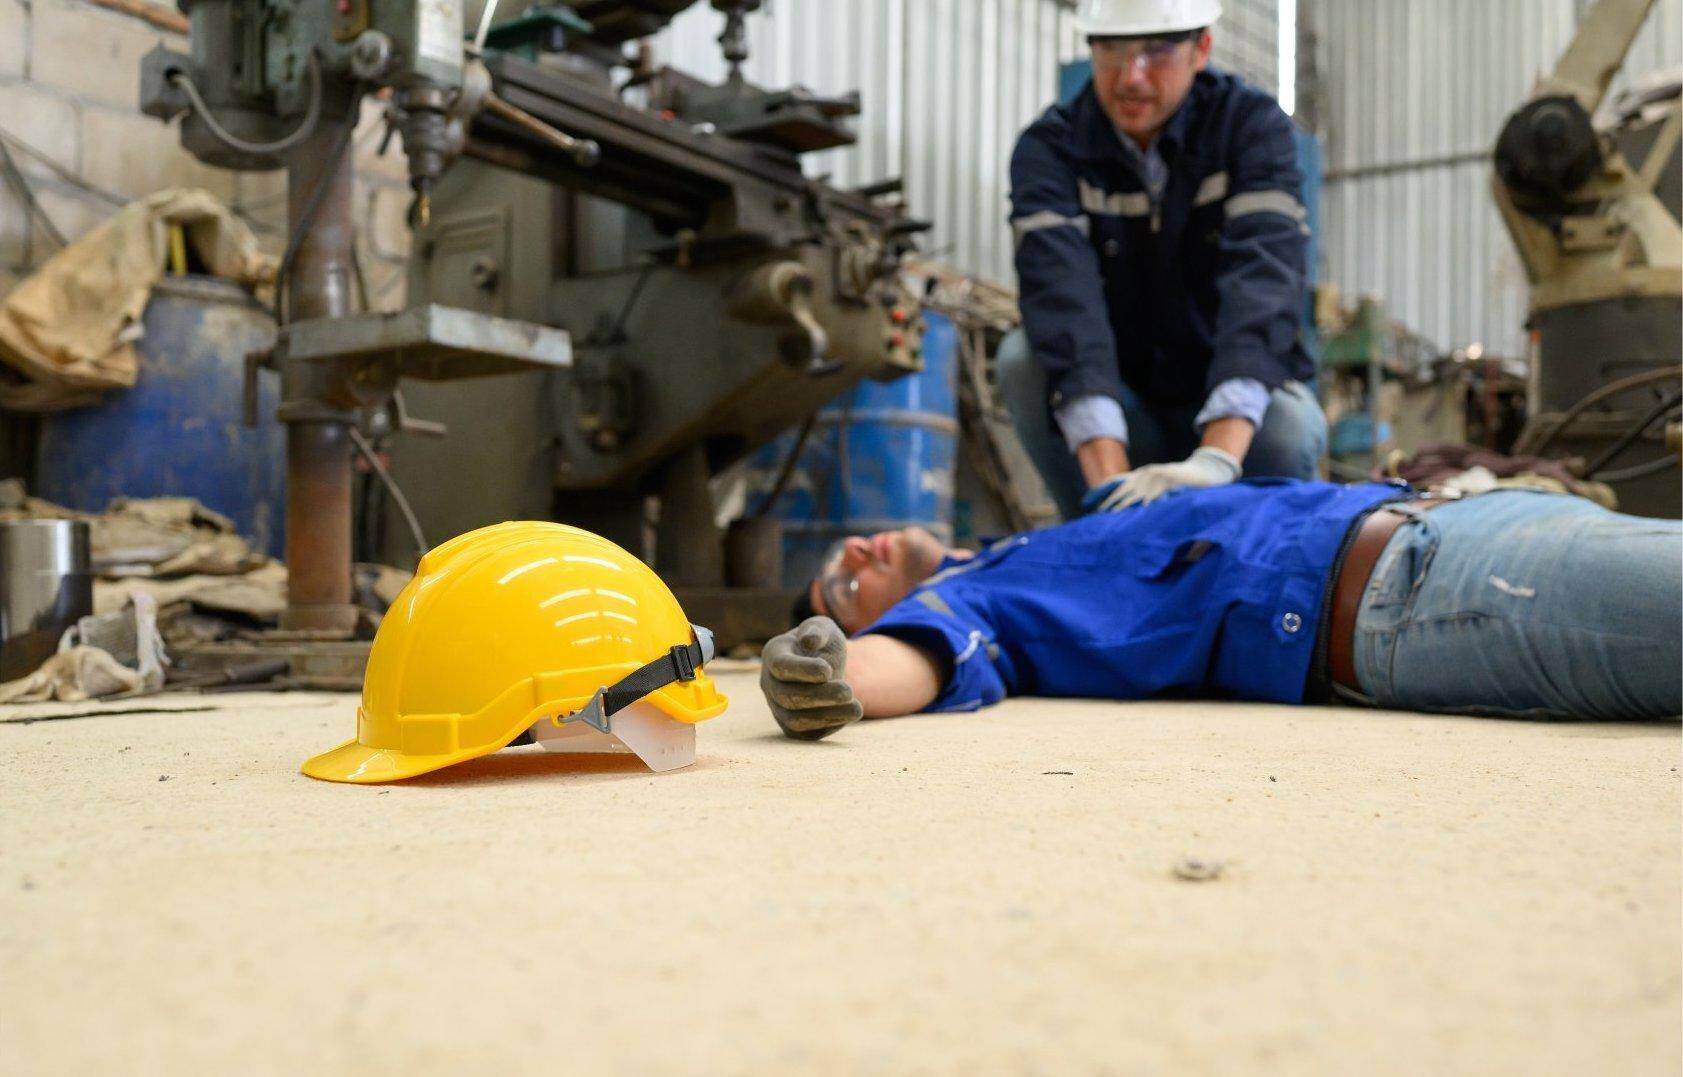 An unconscious man who has been injured on the job who will file for workers compensation in Warner Robins, Georgia